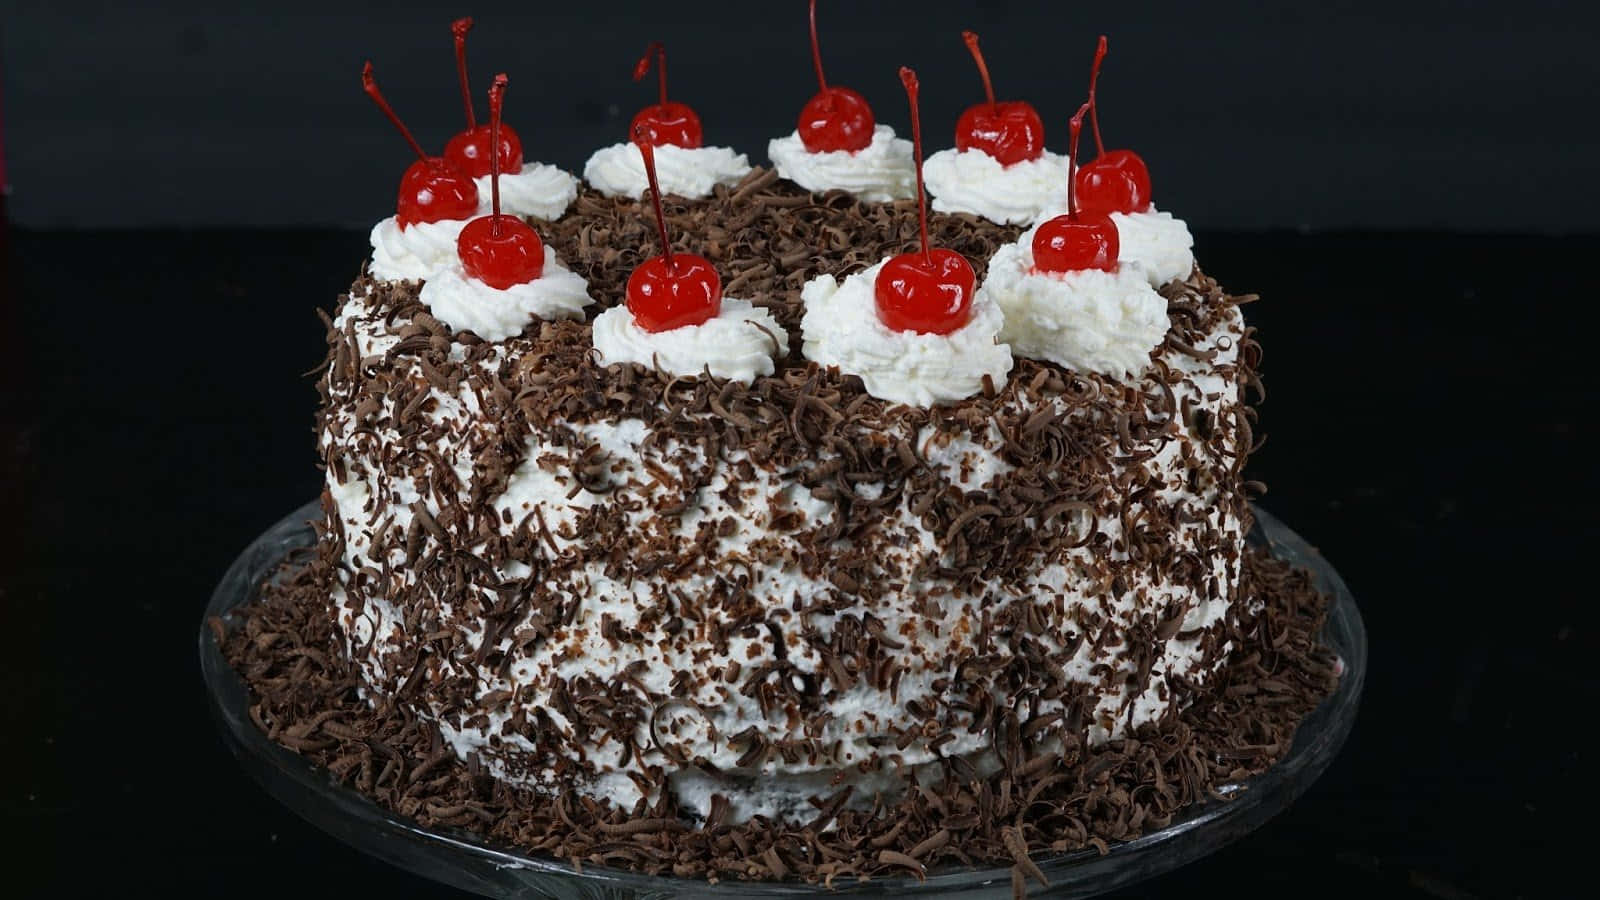 Delicious black forest cake with cherries and chocolate shavings Wallpaper